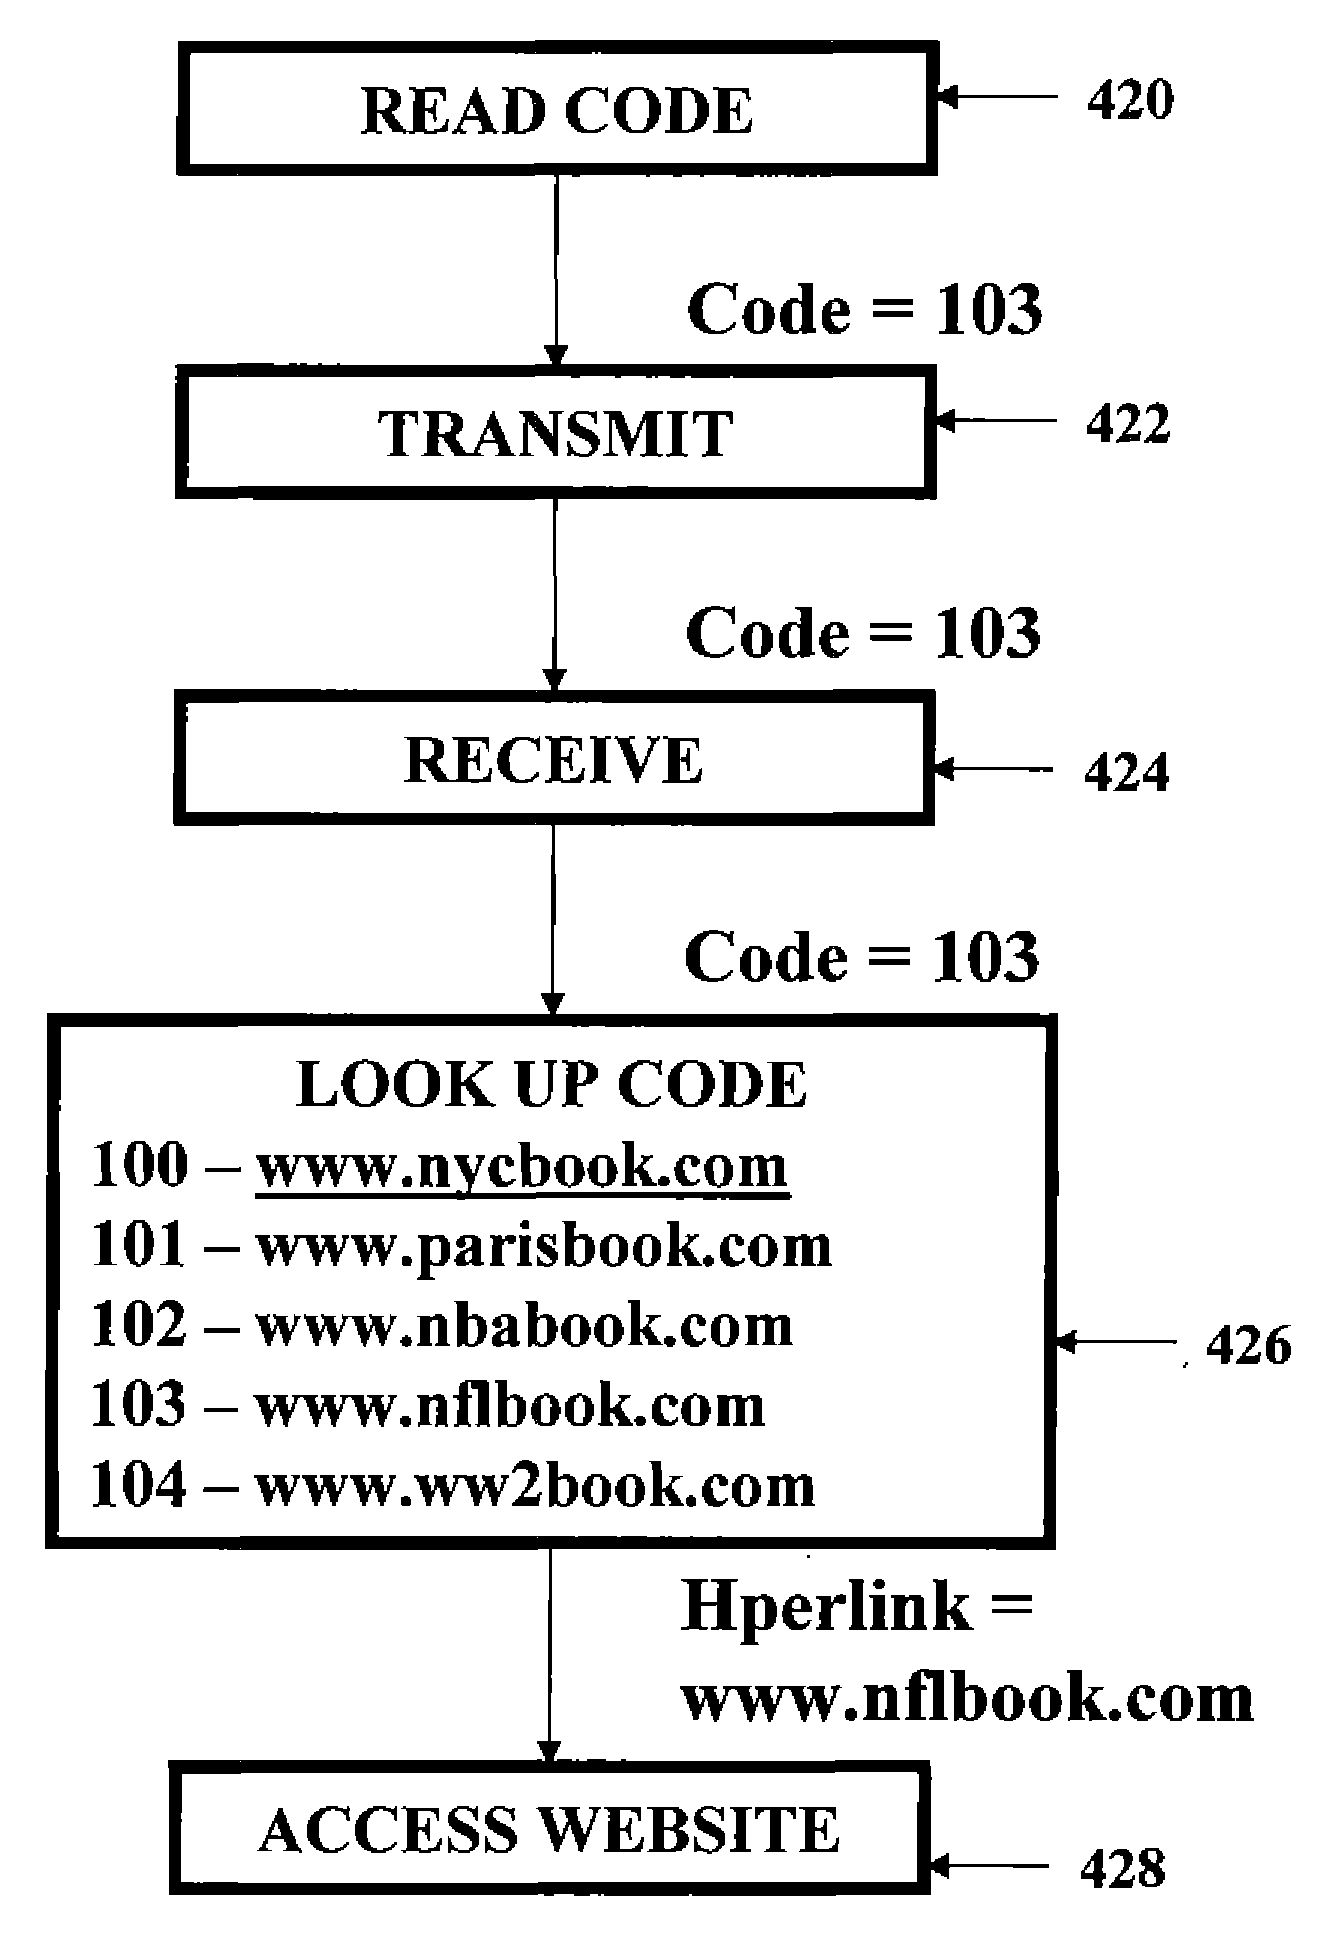 Printed publication with a readable code for connection to a computing device